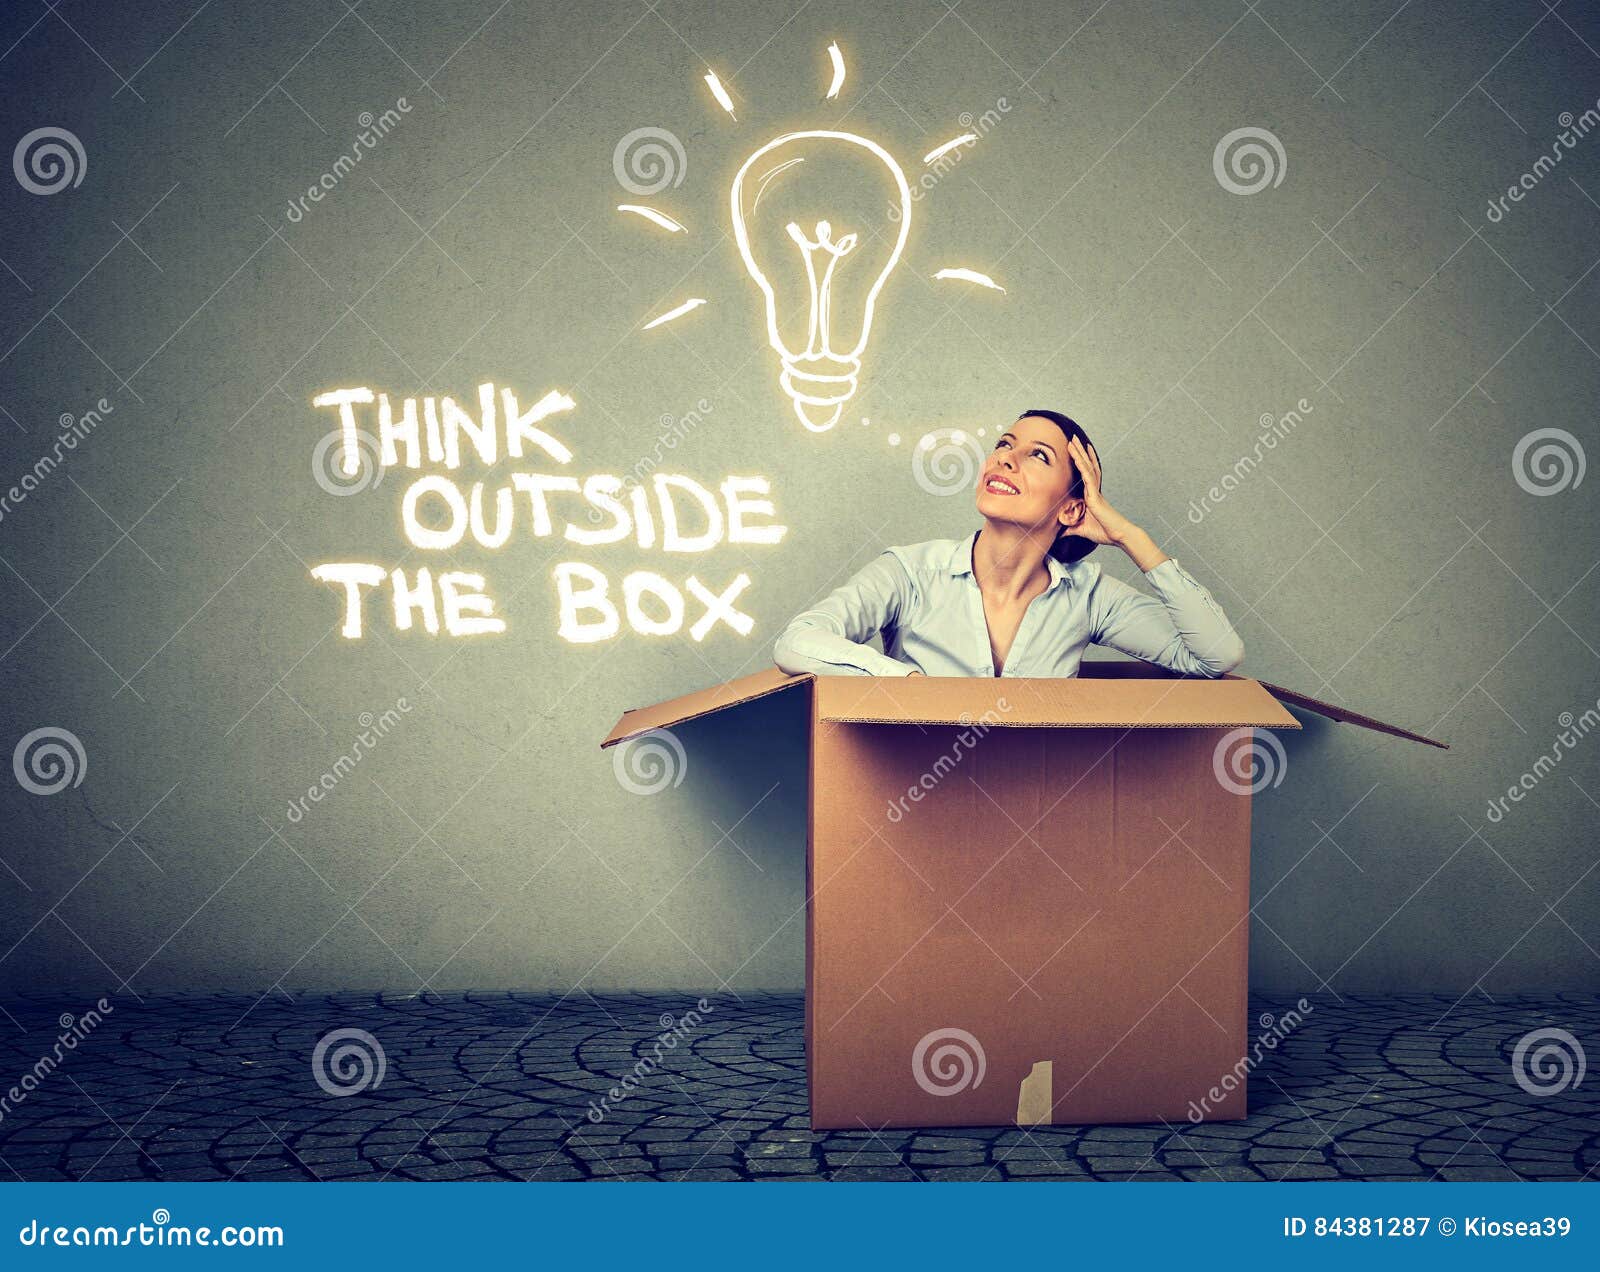 think outside box. woman coming out of box with great idea